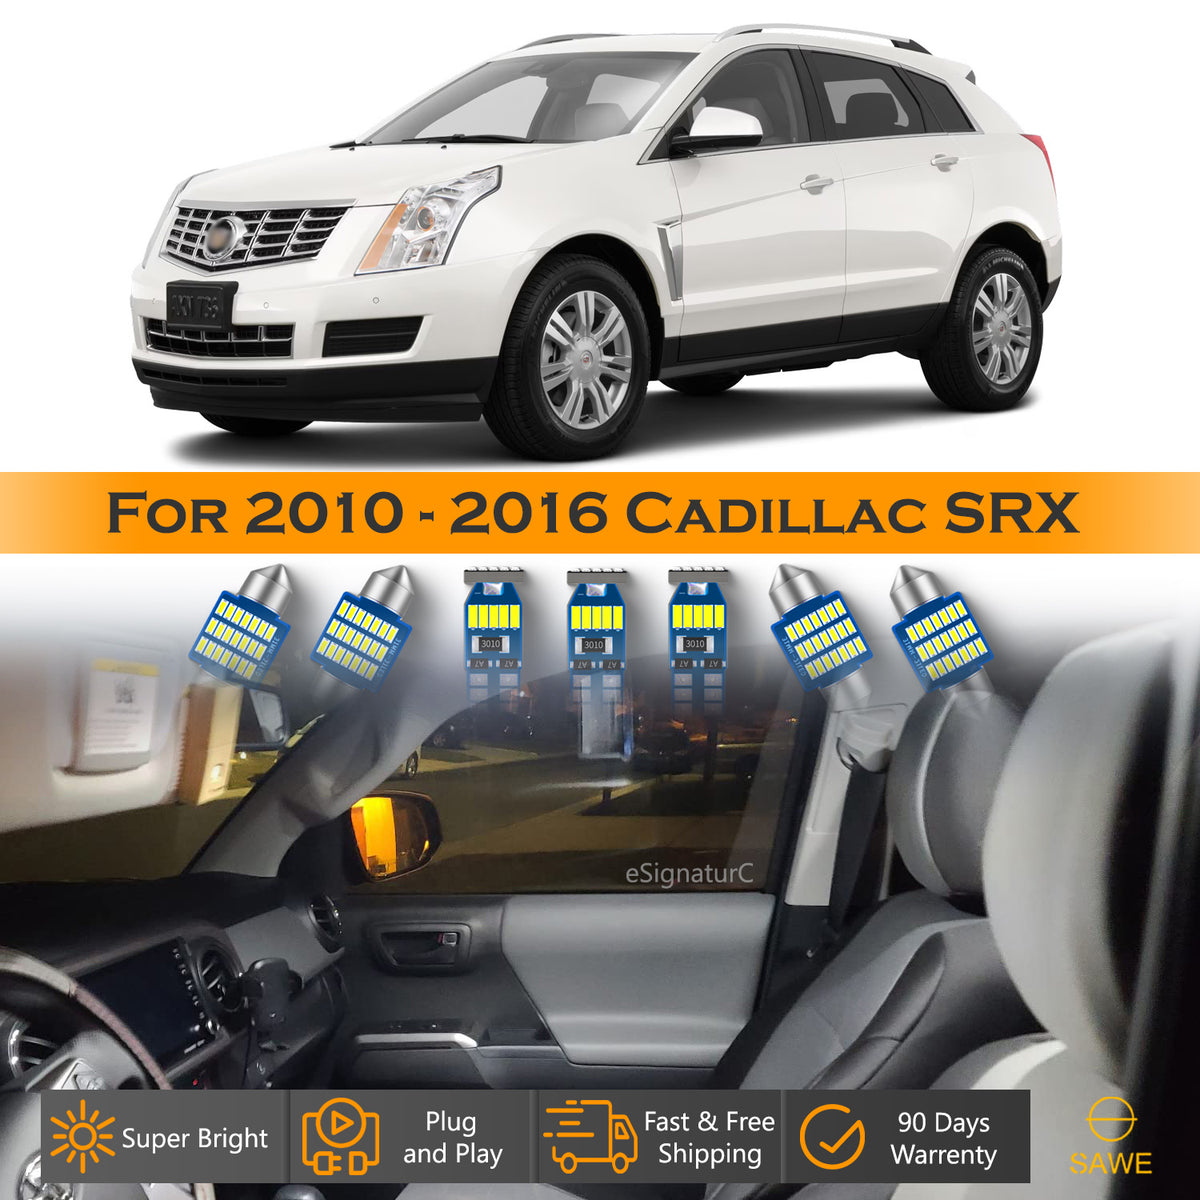 For Cadillac SRX Interior LED Lights - Dome & Map Light Bulbs Package Kit for 2010 - 2016 - White